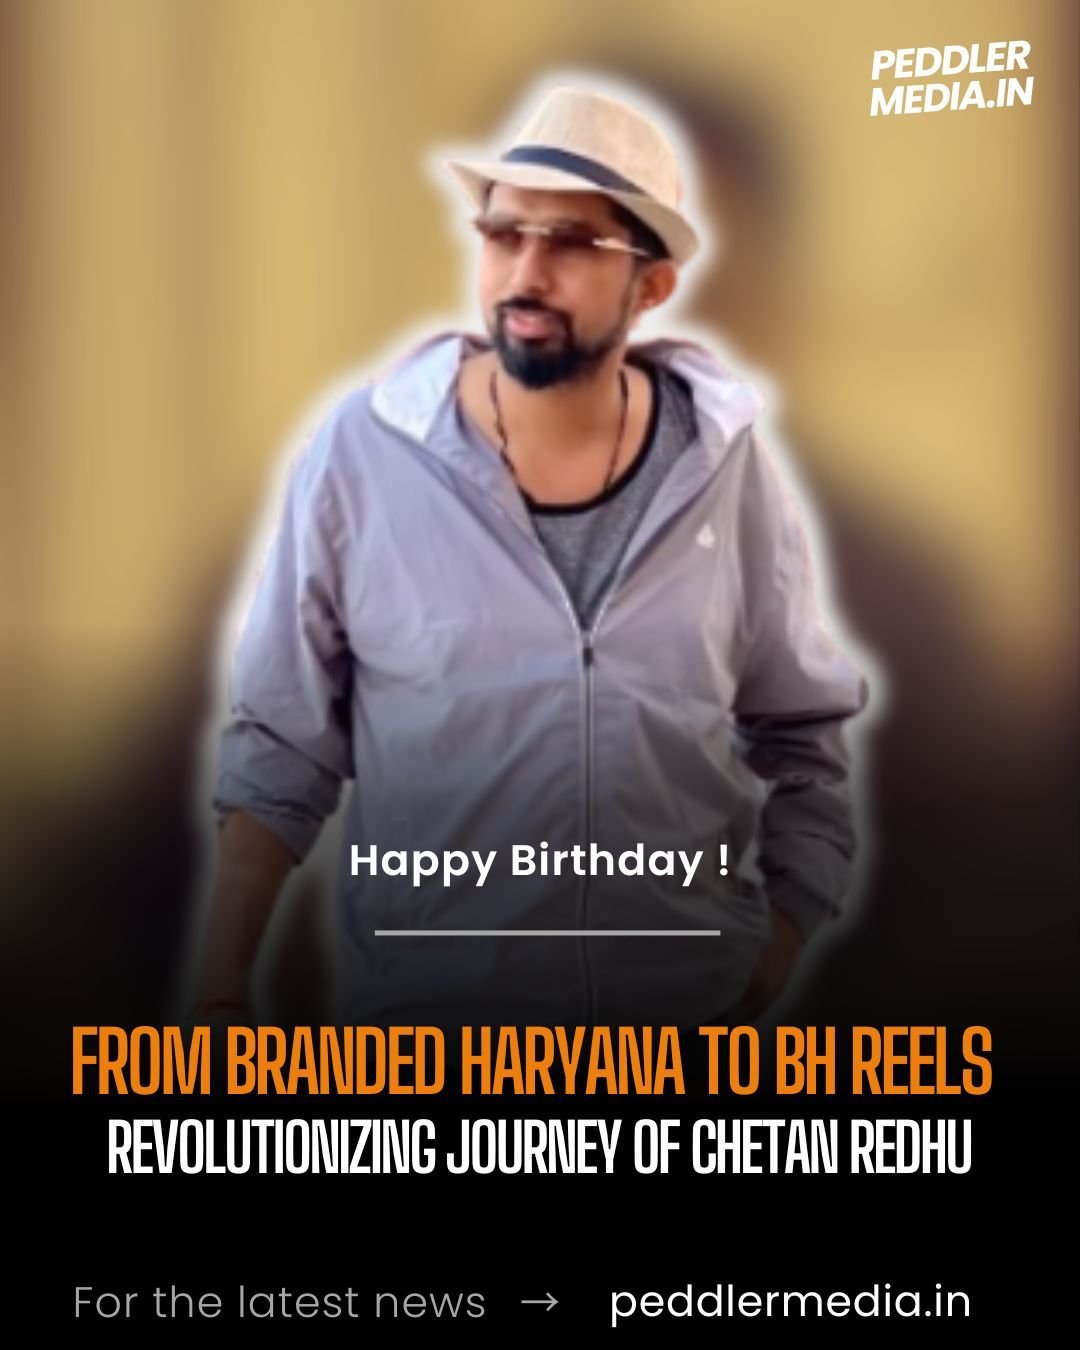 Happy Birthday to Chetan Redhu, the mastermind behind BH Reels and Branded Haryana, transforming Haryanvi entertainment with his innovative vision.